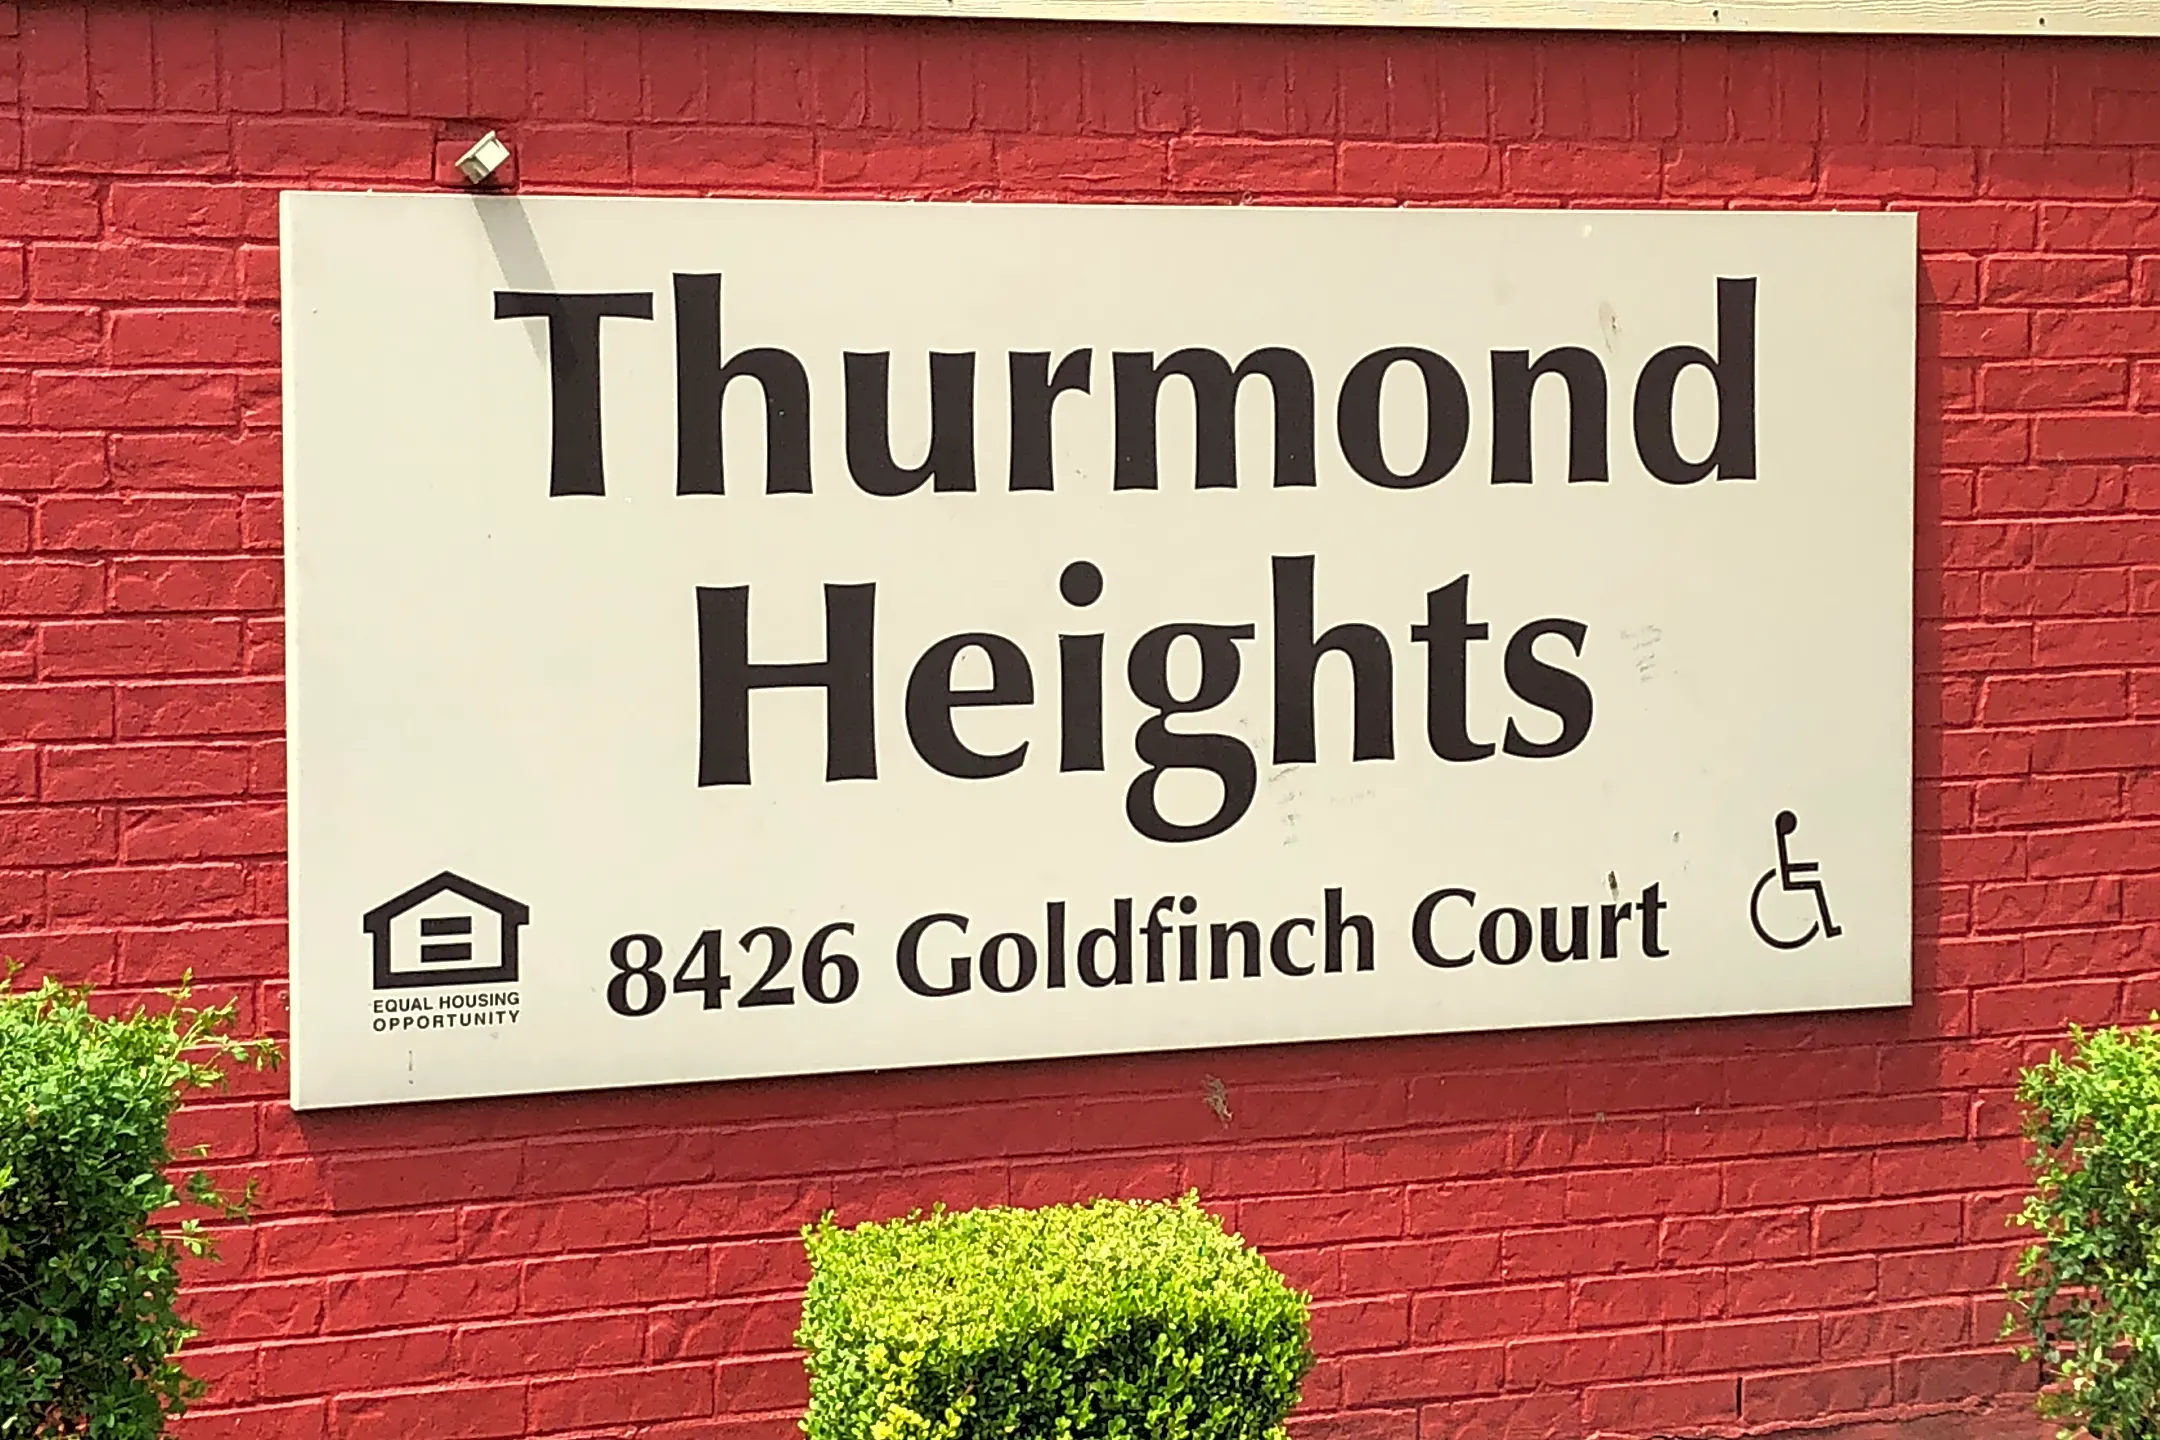 Thurmond Heights 8426 GOLDFINCH CT Austin TX Apartments for Rent